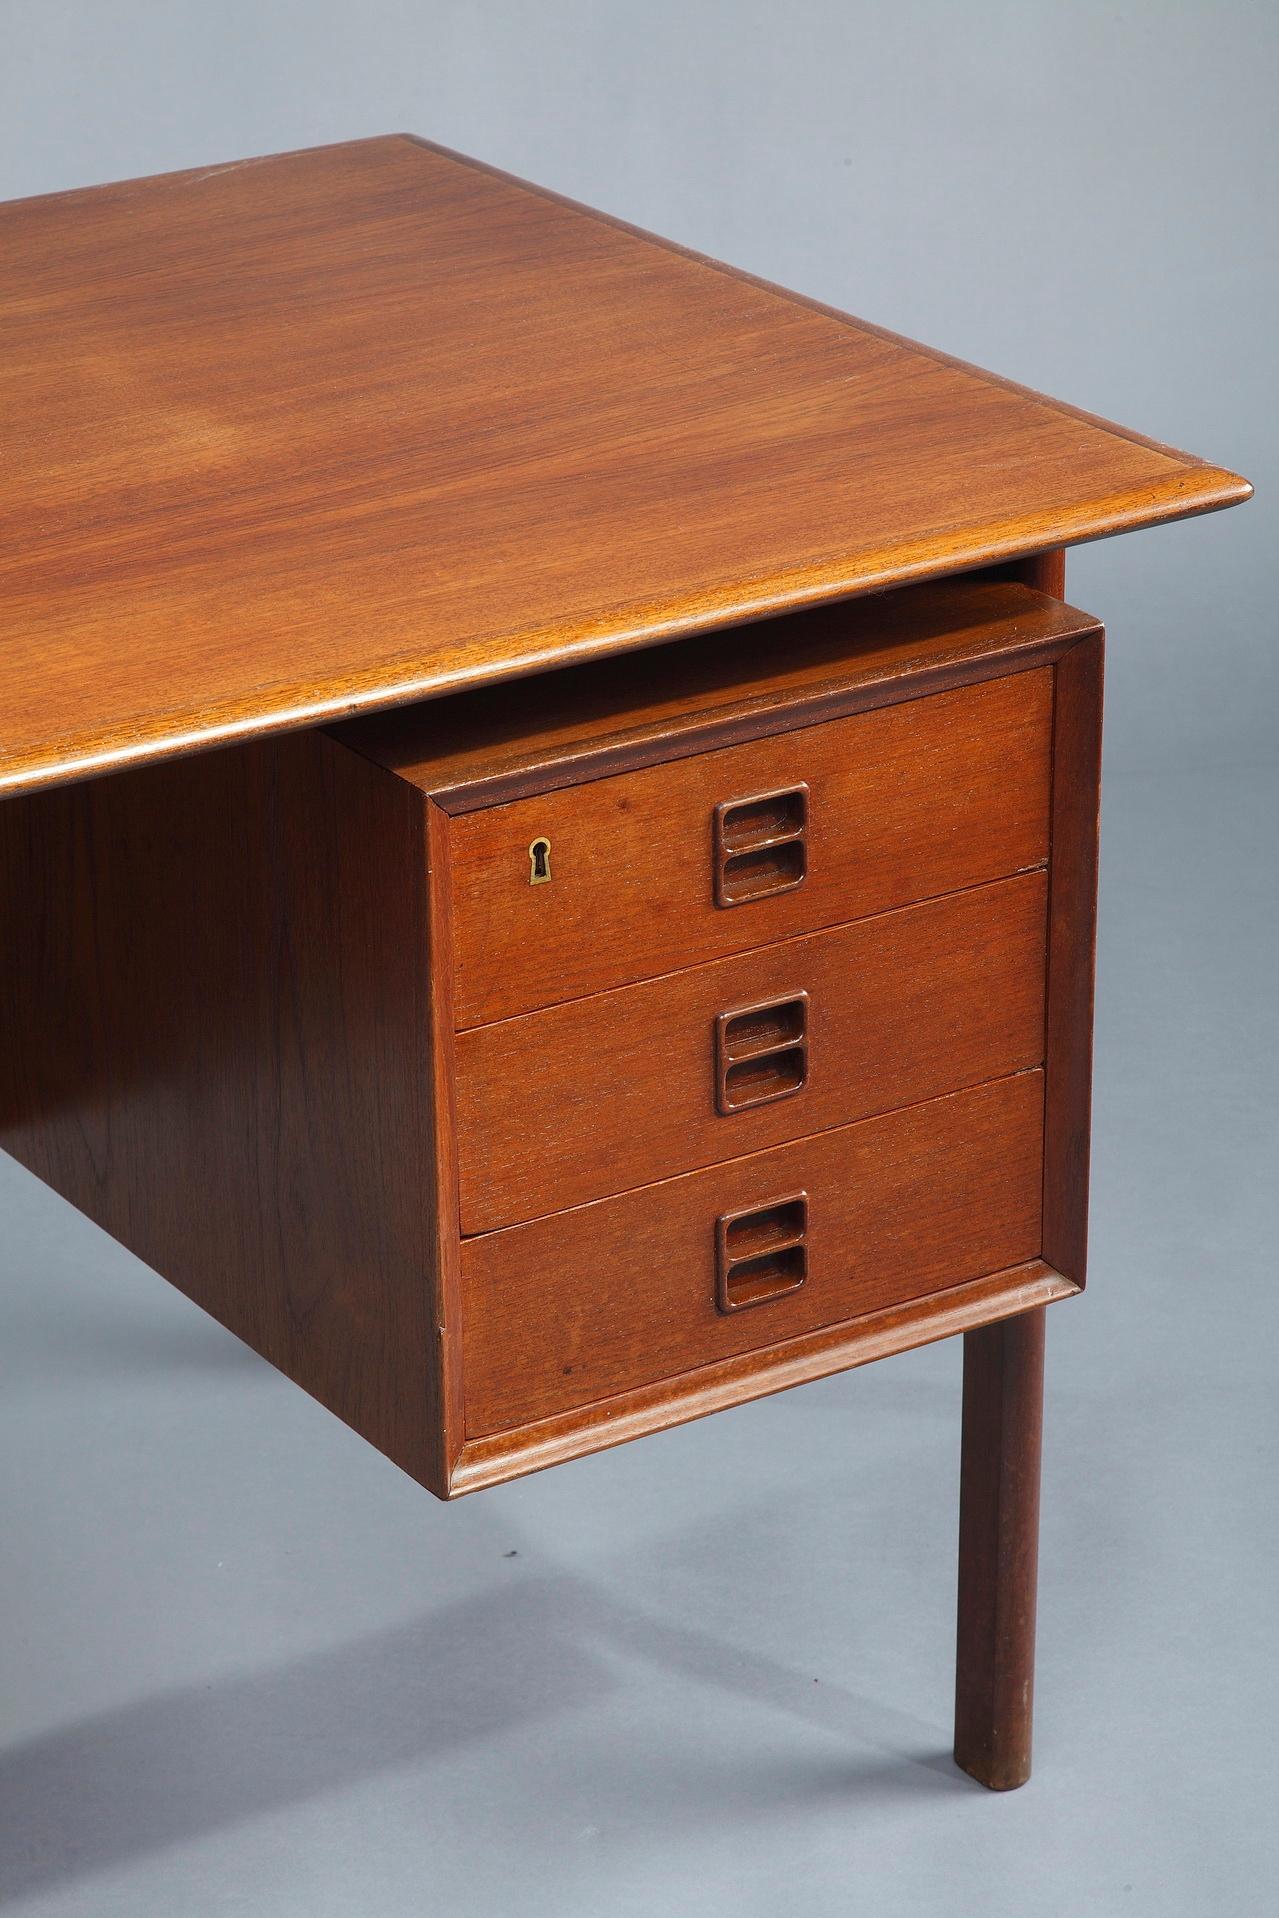 Scandinavian desk crafted in rosewood. It has 6 drawers and 3 large, open bookshelves in the back. Original key included. Designed by Arne Vodder (1926-2009), Denmark. Manufactured by Sibast. The piece is representative for the Danish